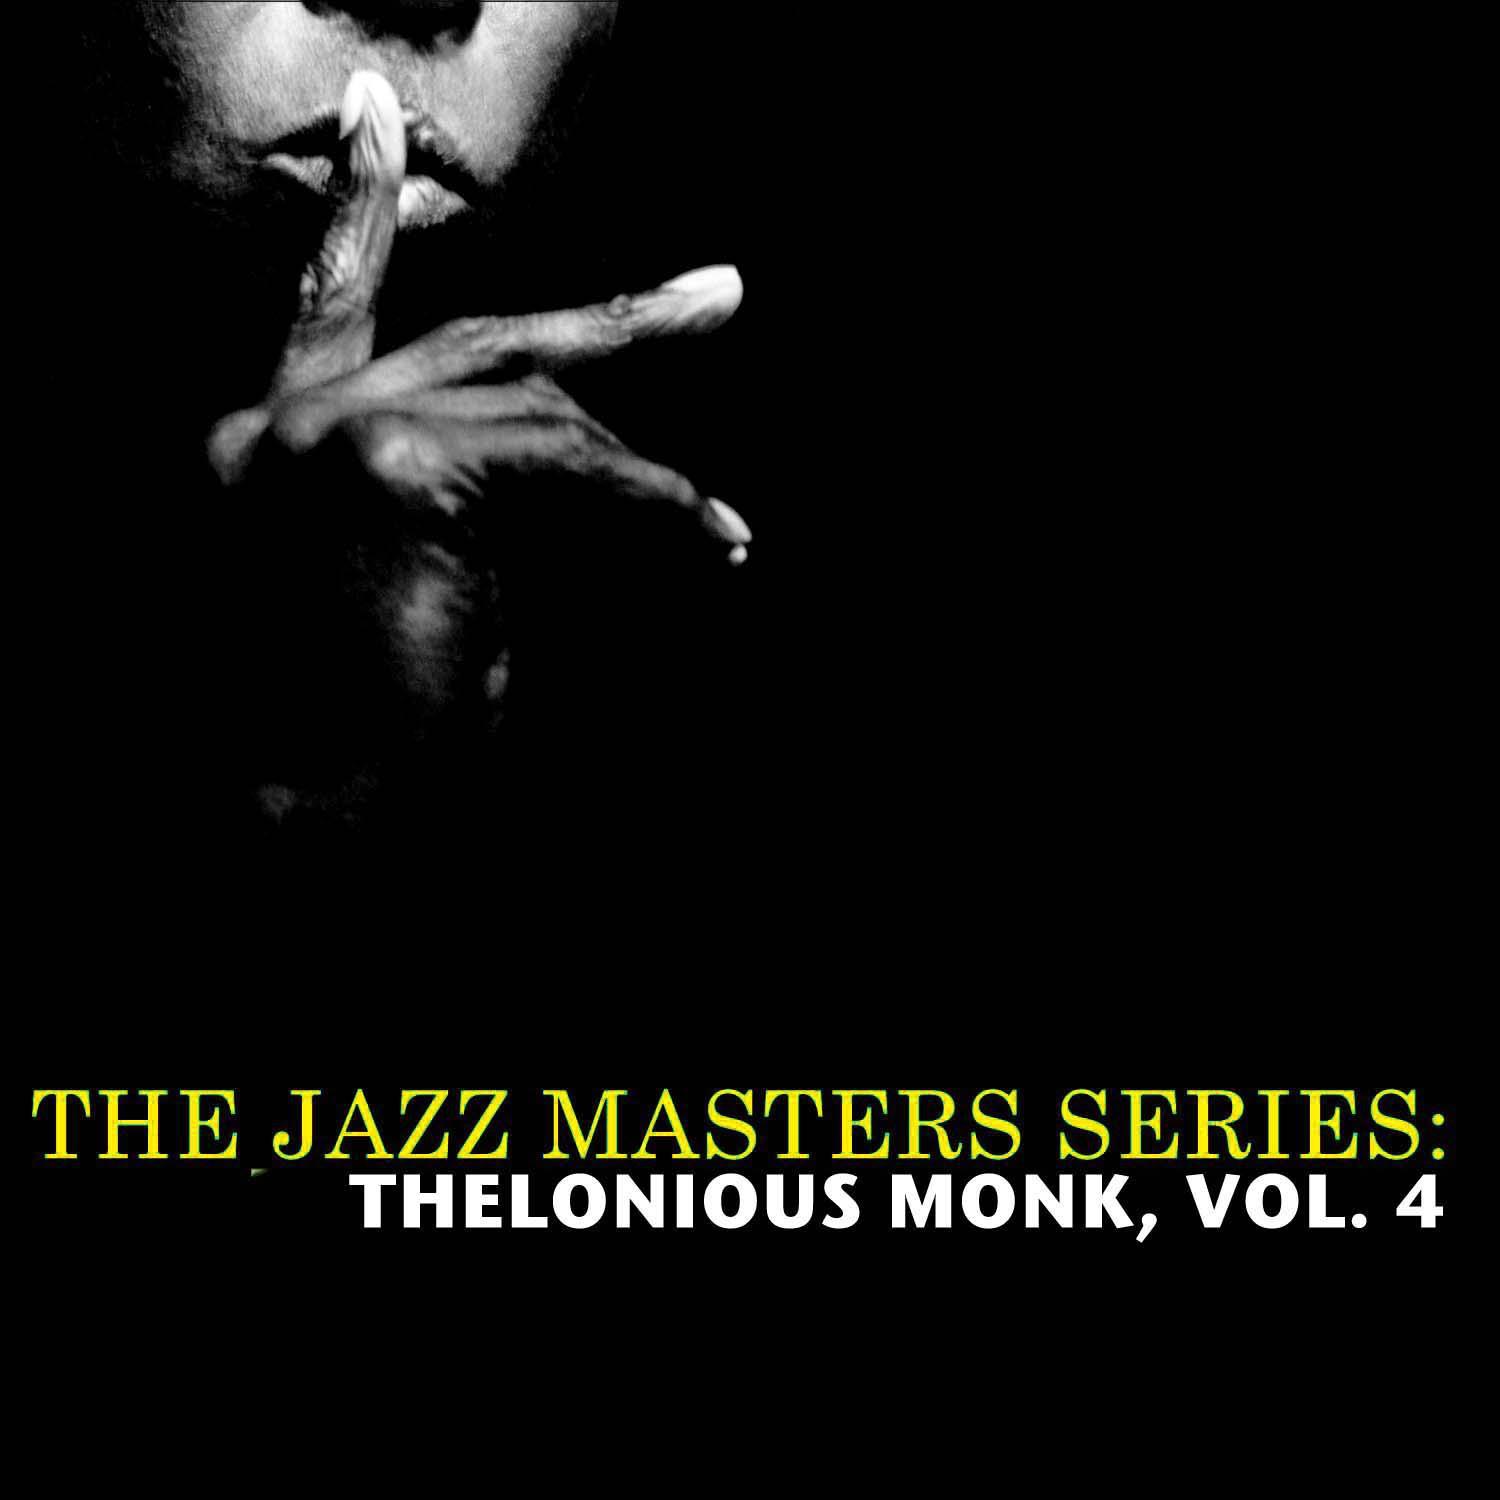 The Jazz Masters Series: Thelonious Monk, Vol. 4